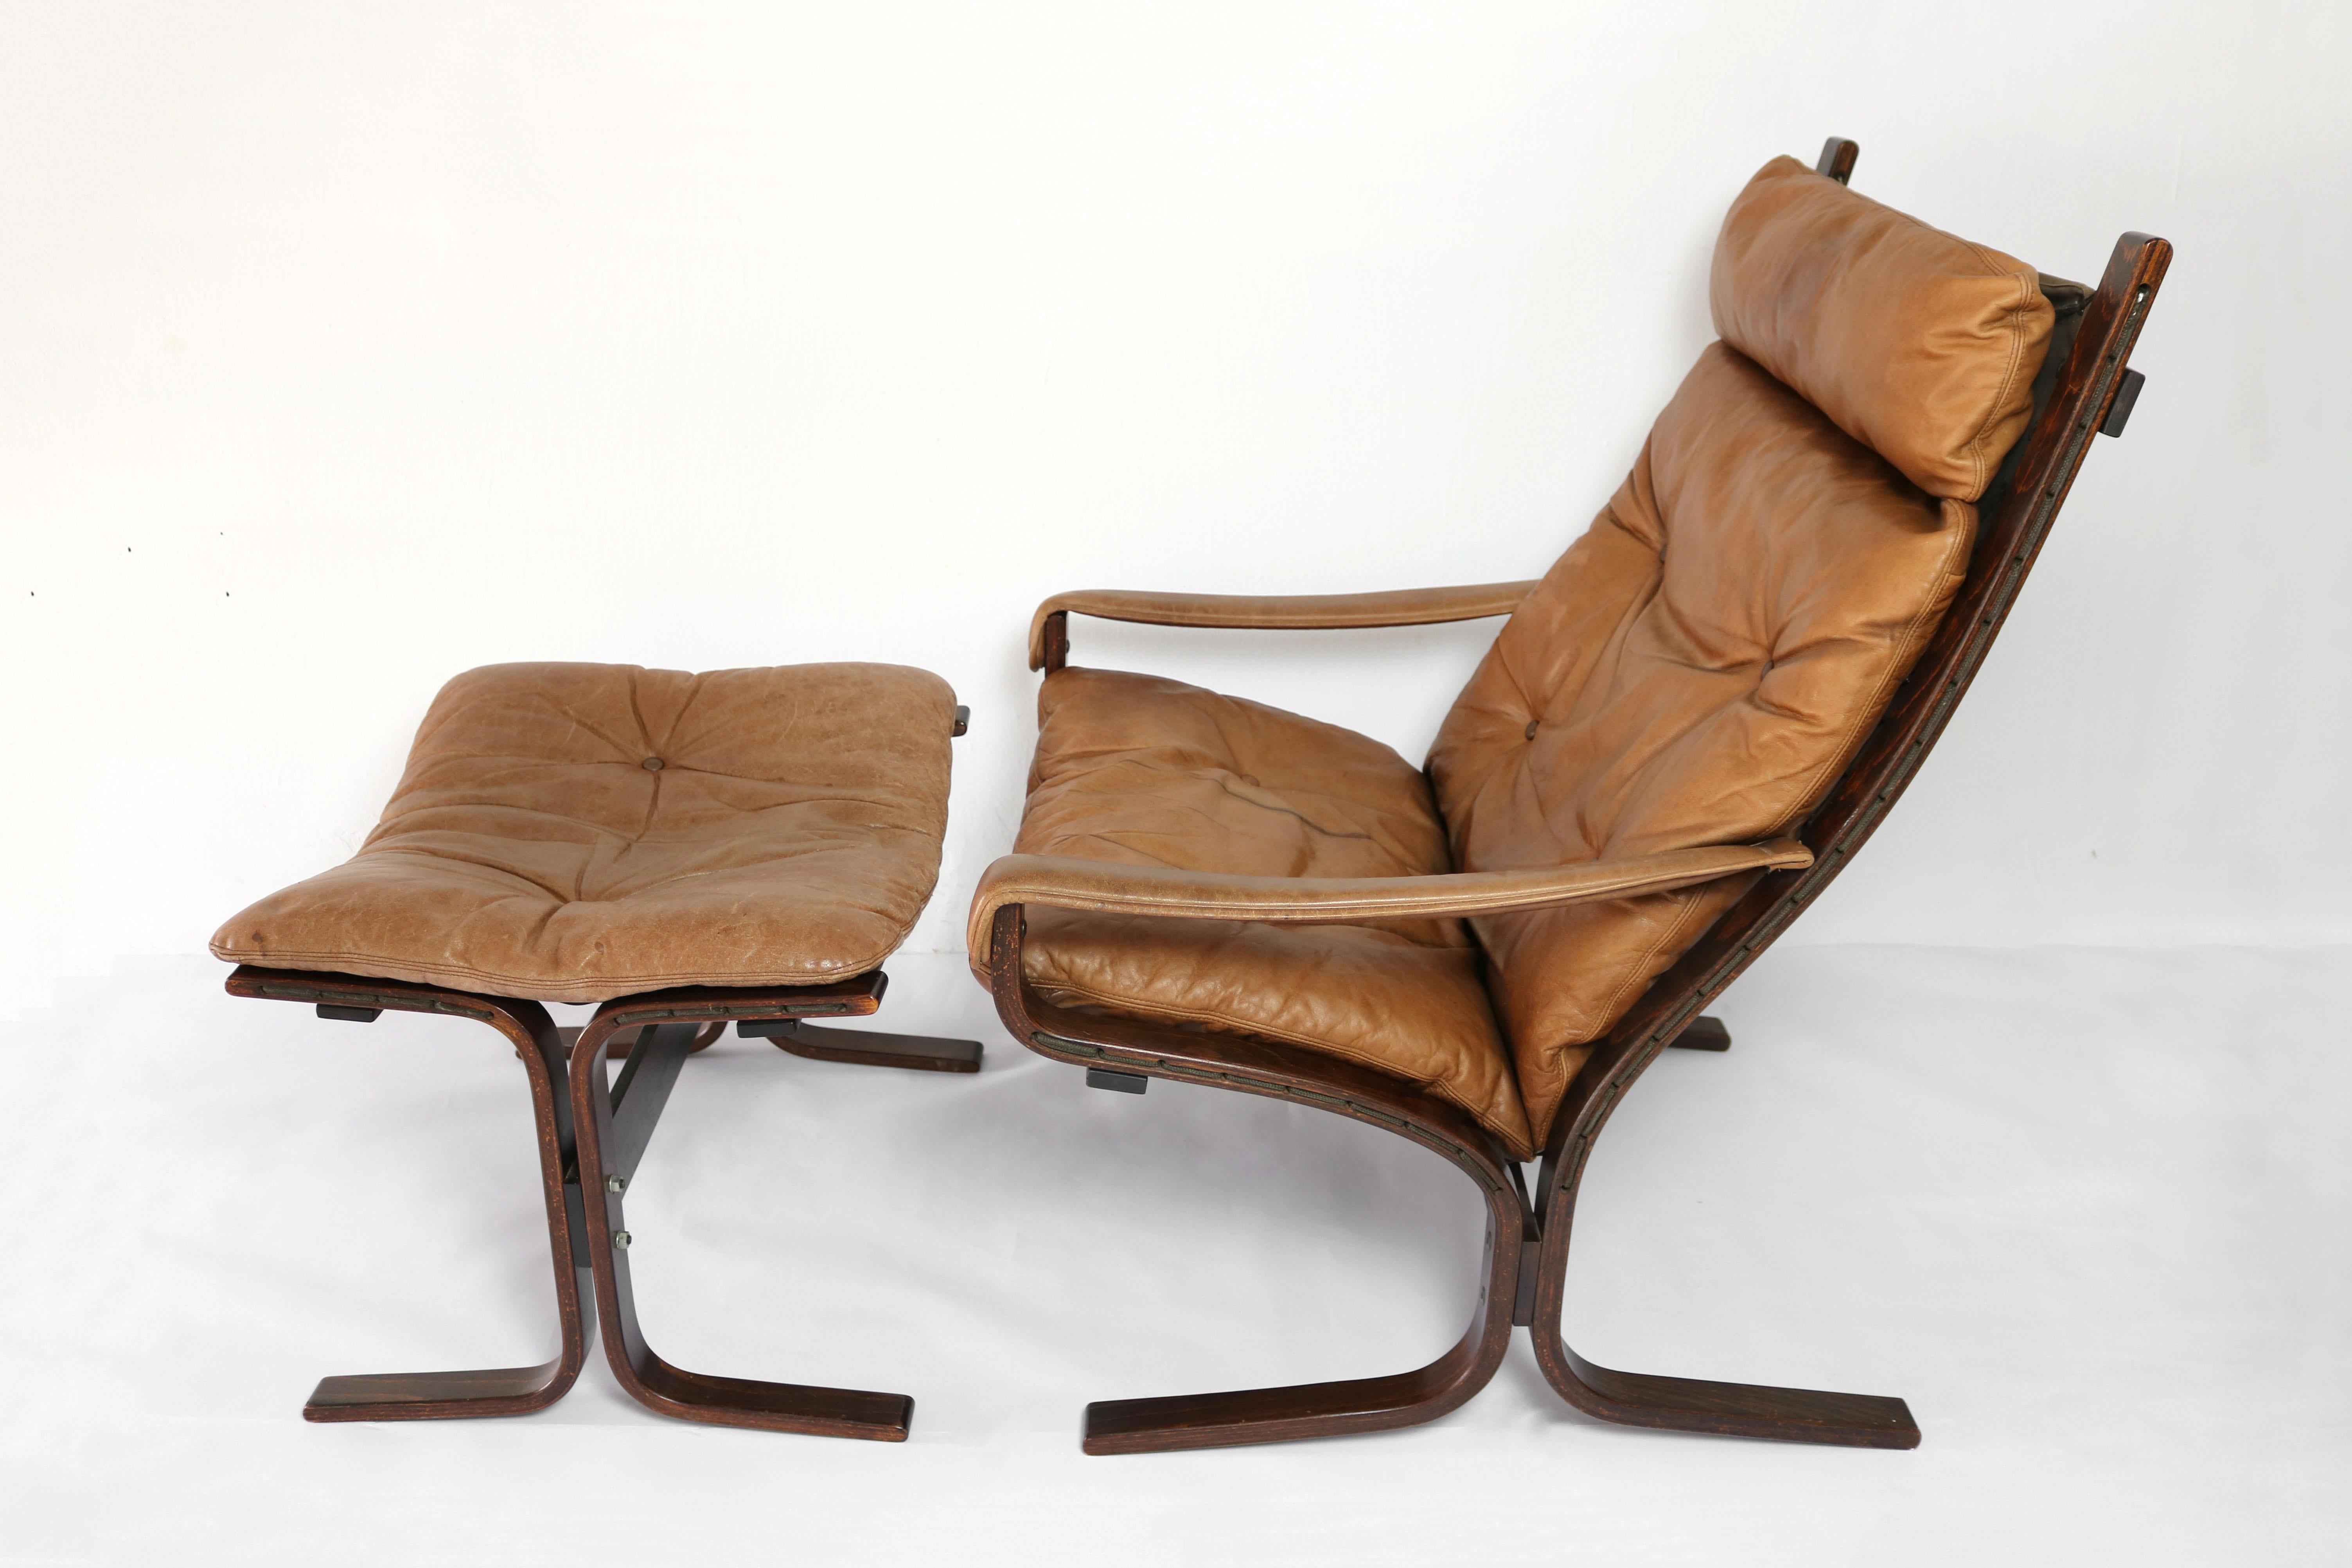 Siesta armchair in brown leather with matching ottoman by designer Ingmar Relling for Westnofa Furniture in Norway, 1960s. 

The wood is in excellent condition. Very good vintage condition.
 